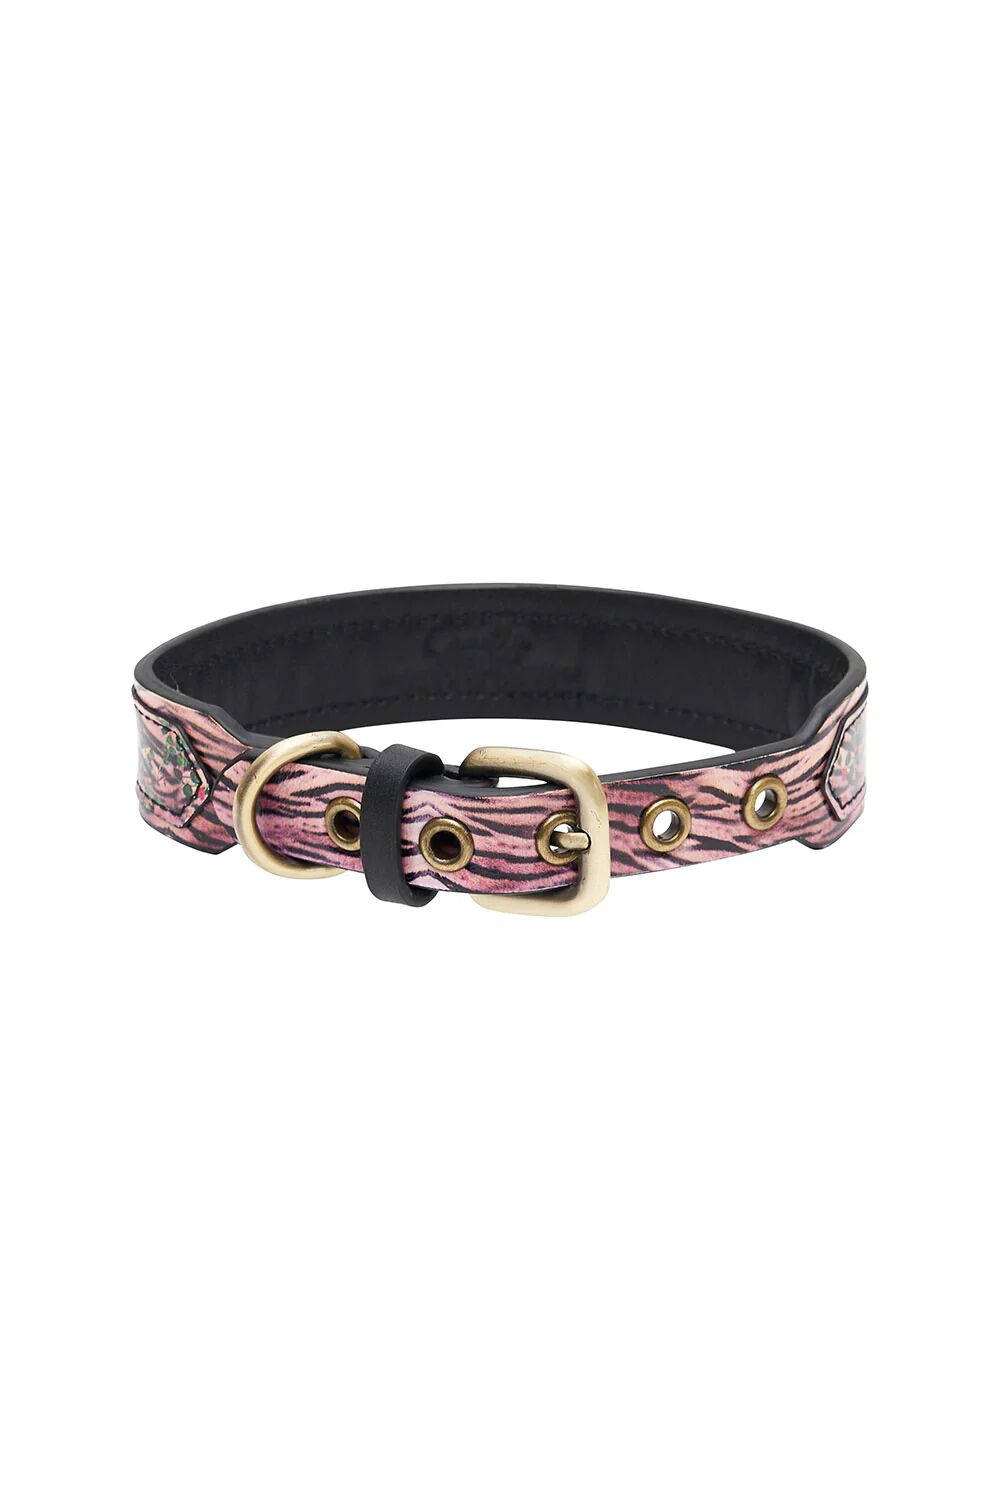 Camilla eBoutique Printed Dog Collar if these Walls Could Talk, M/L  - Size: M/L